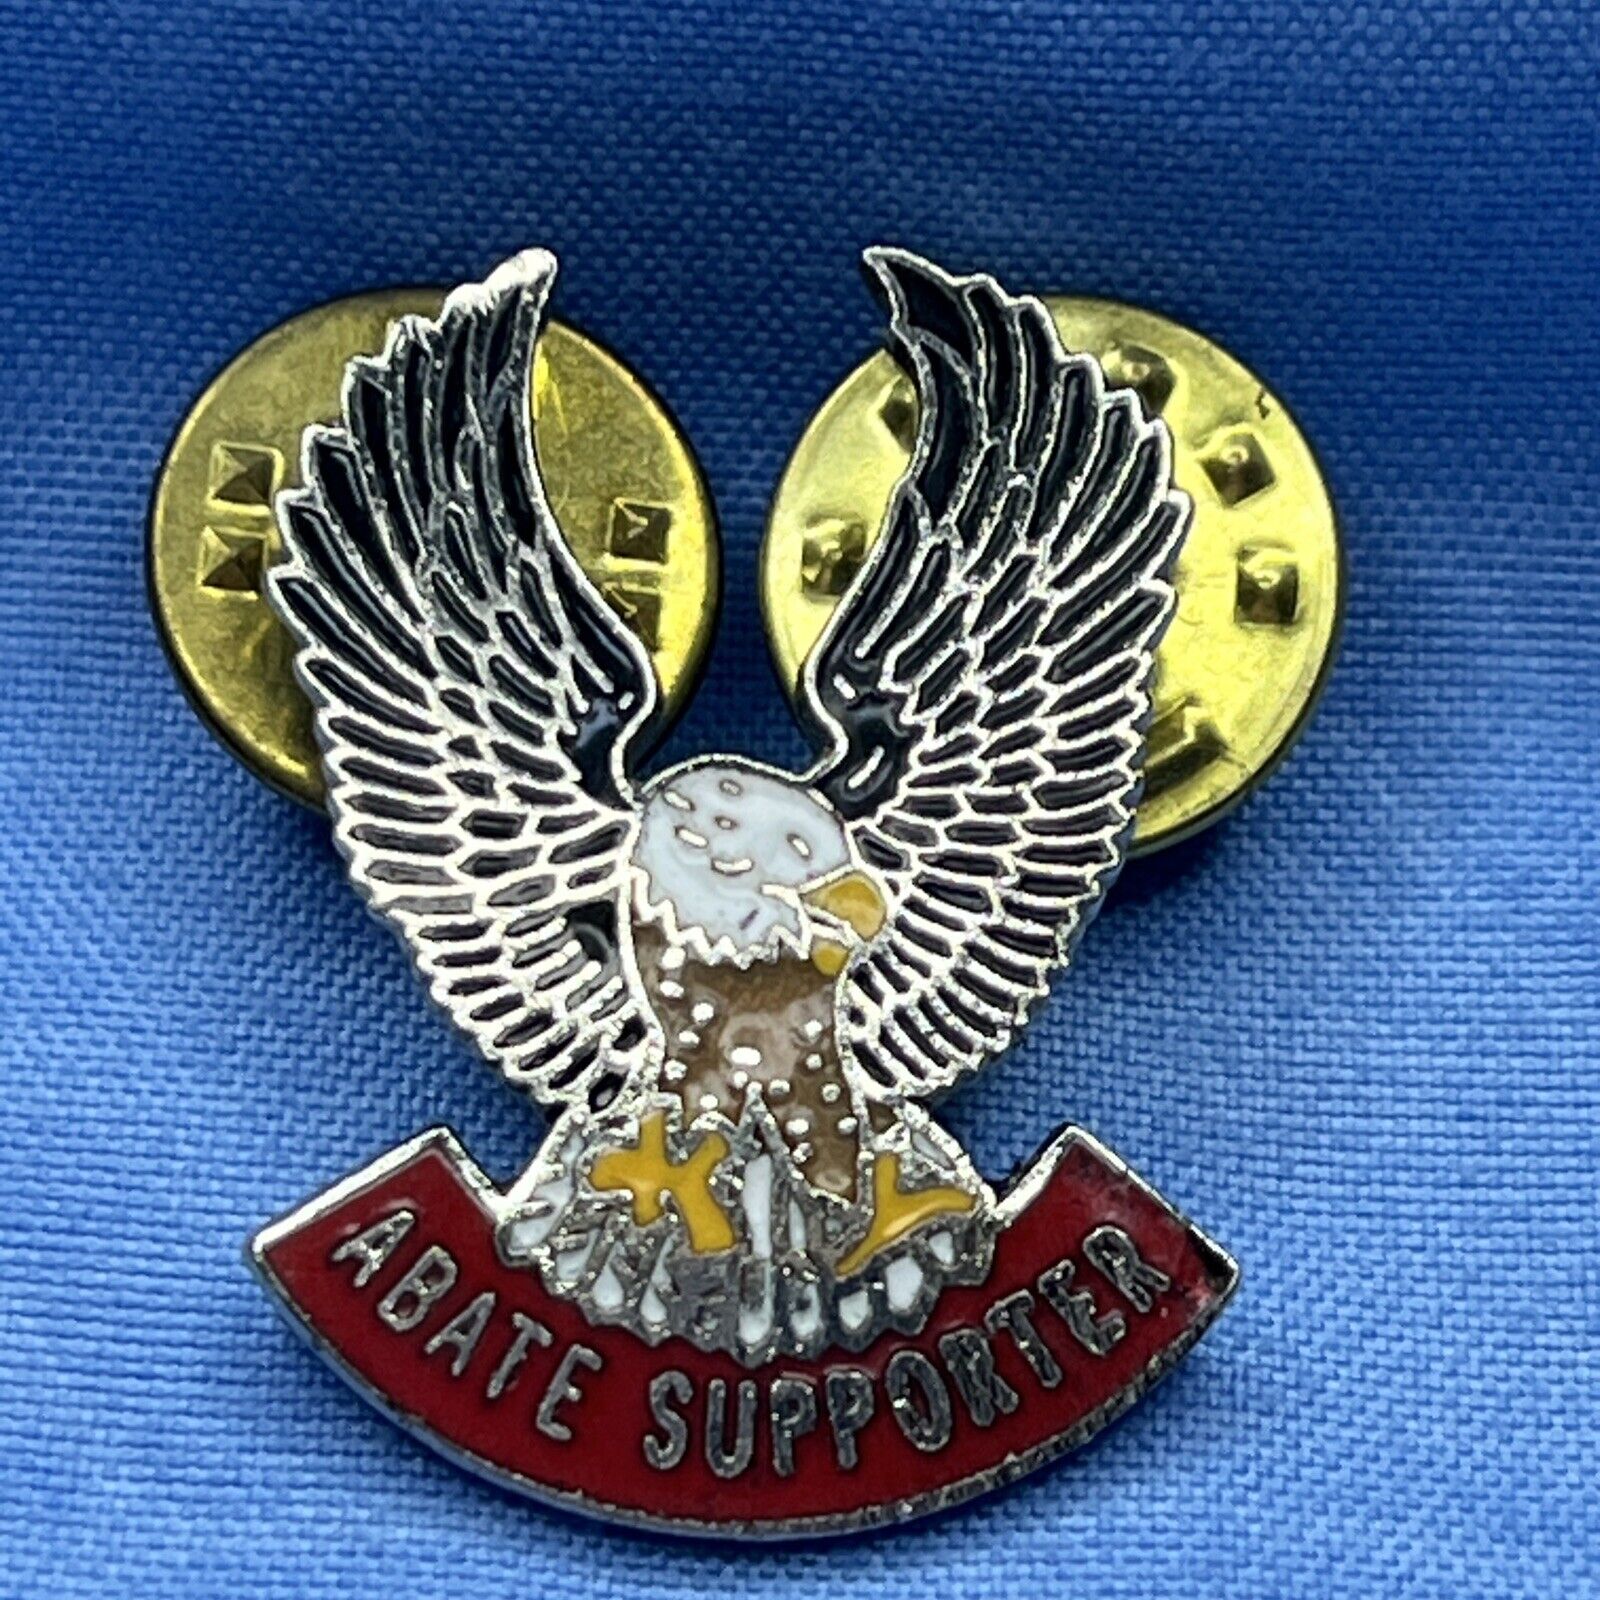 Abate Supporter Motorcycle Organization Club Eagle Pin